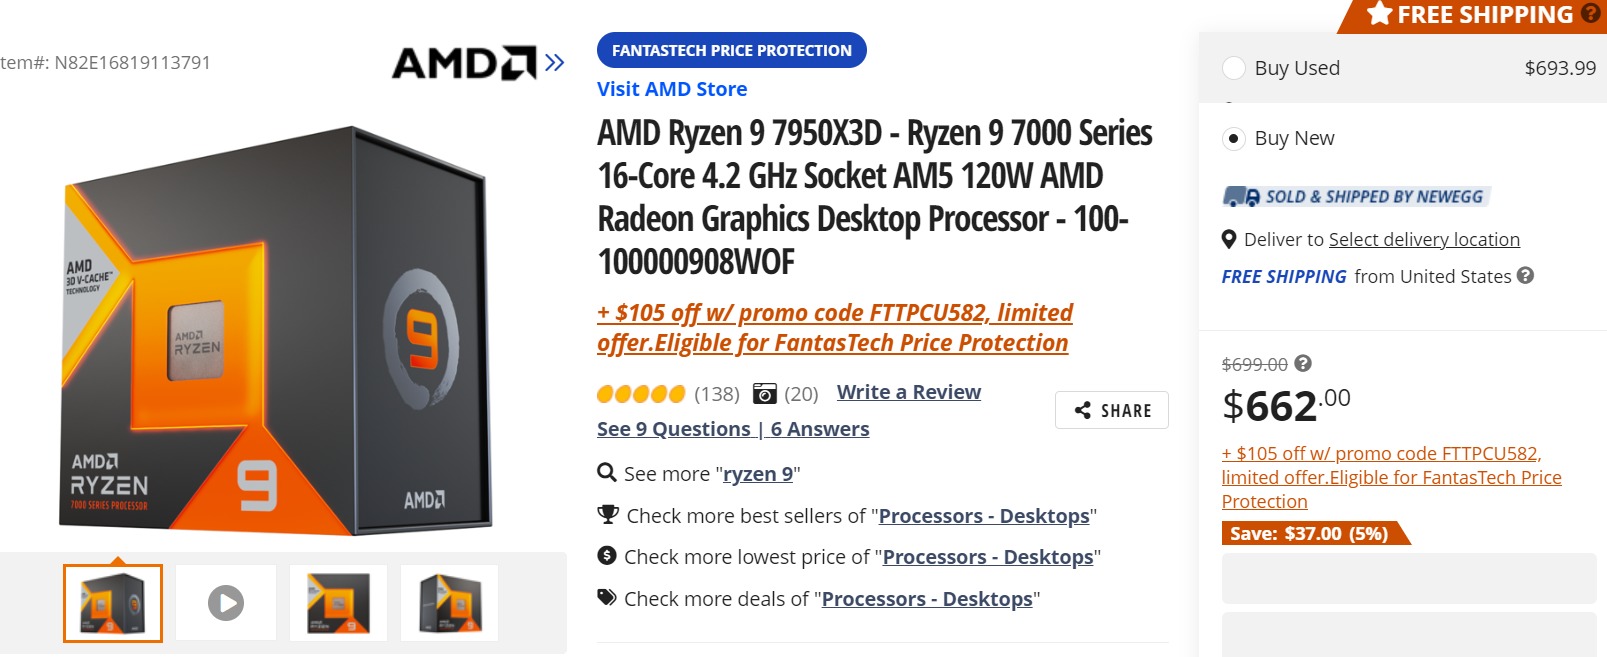 AMD Ryzen 9 7950X3D launches February 28th, costs $699 